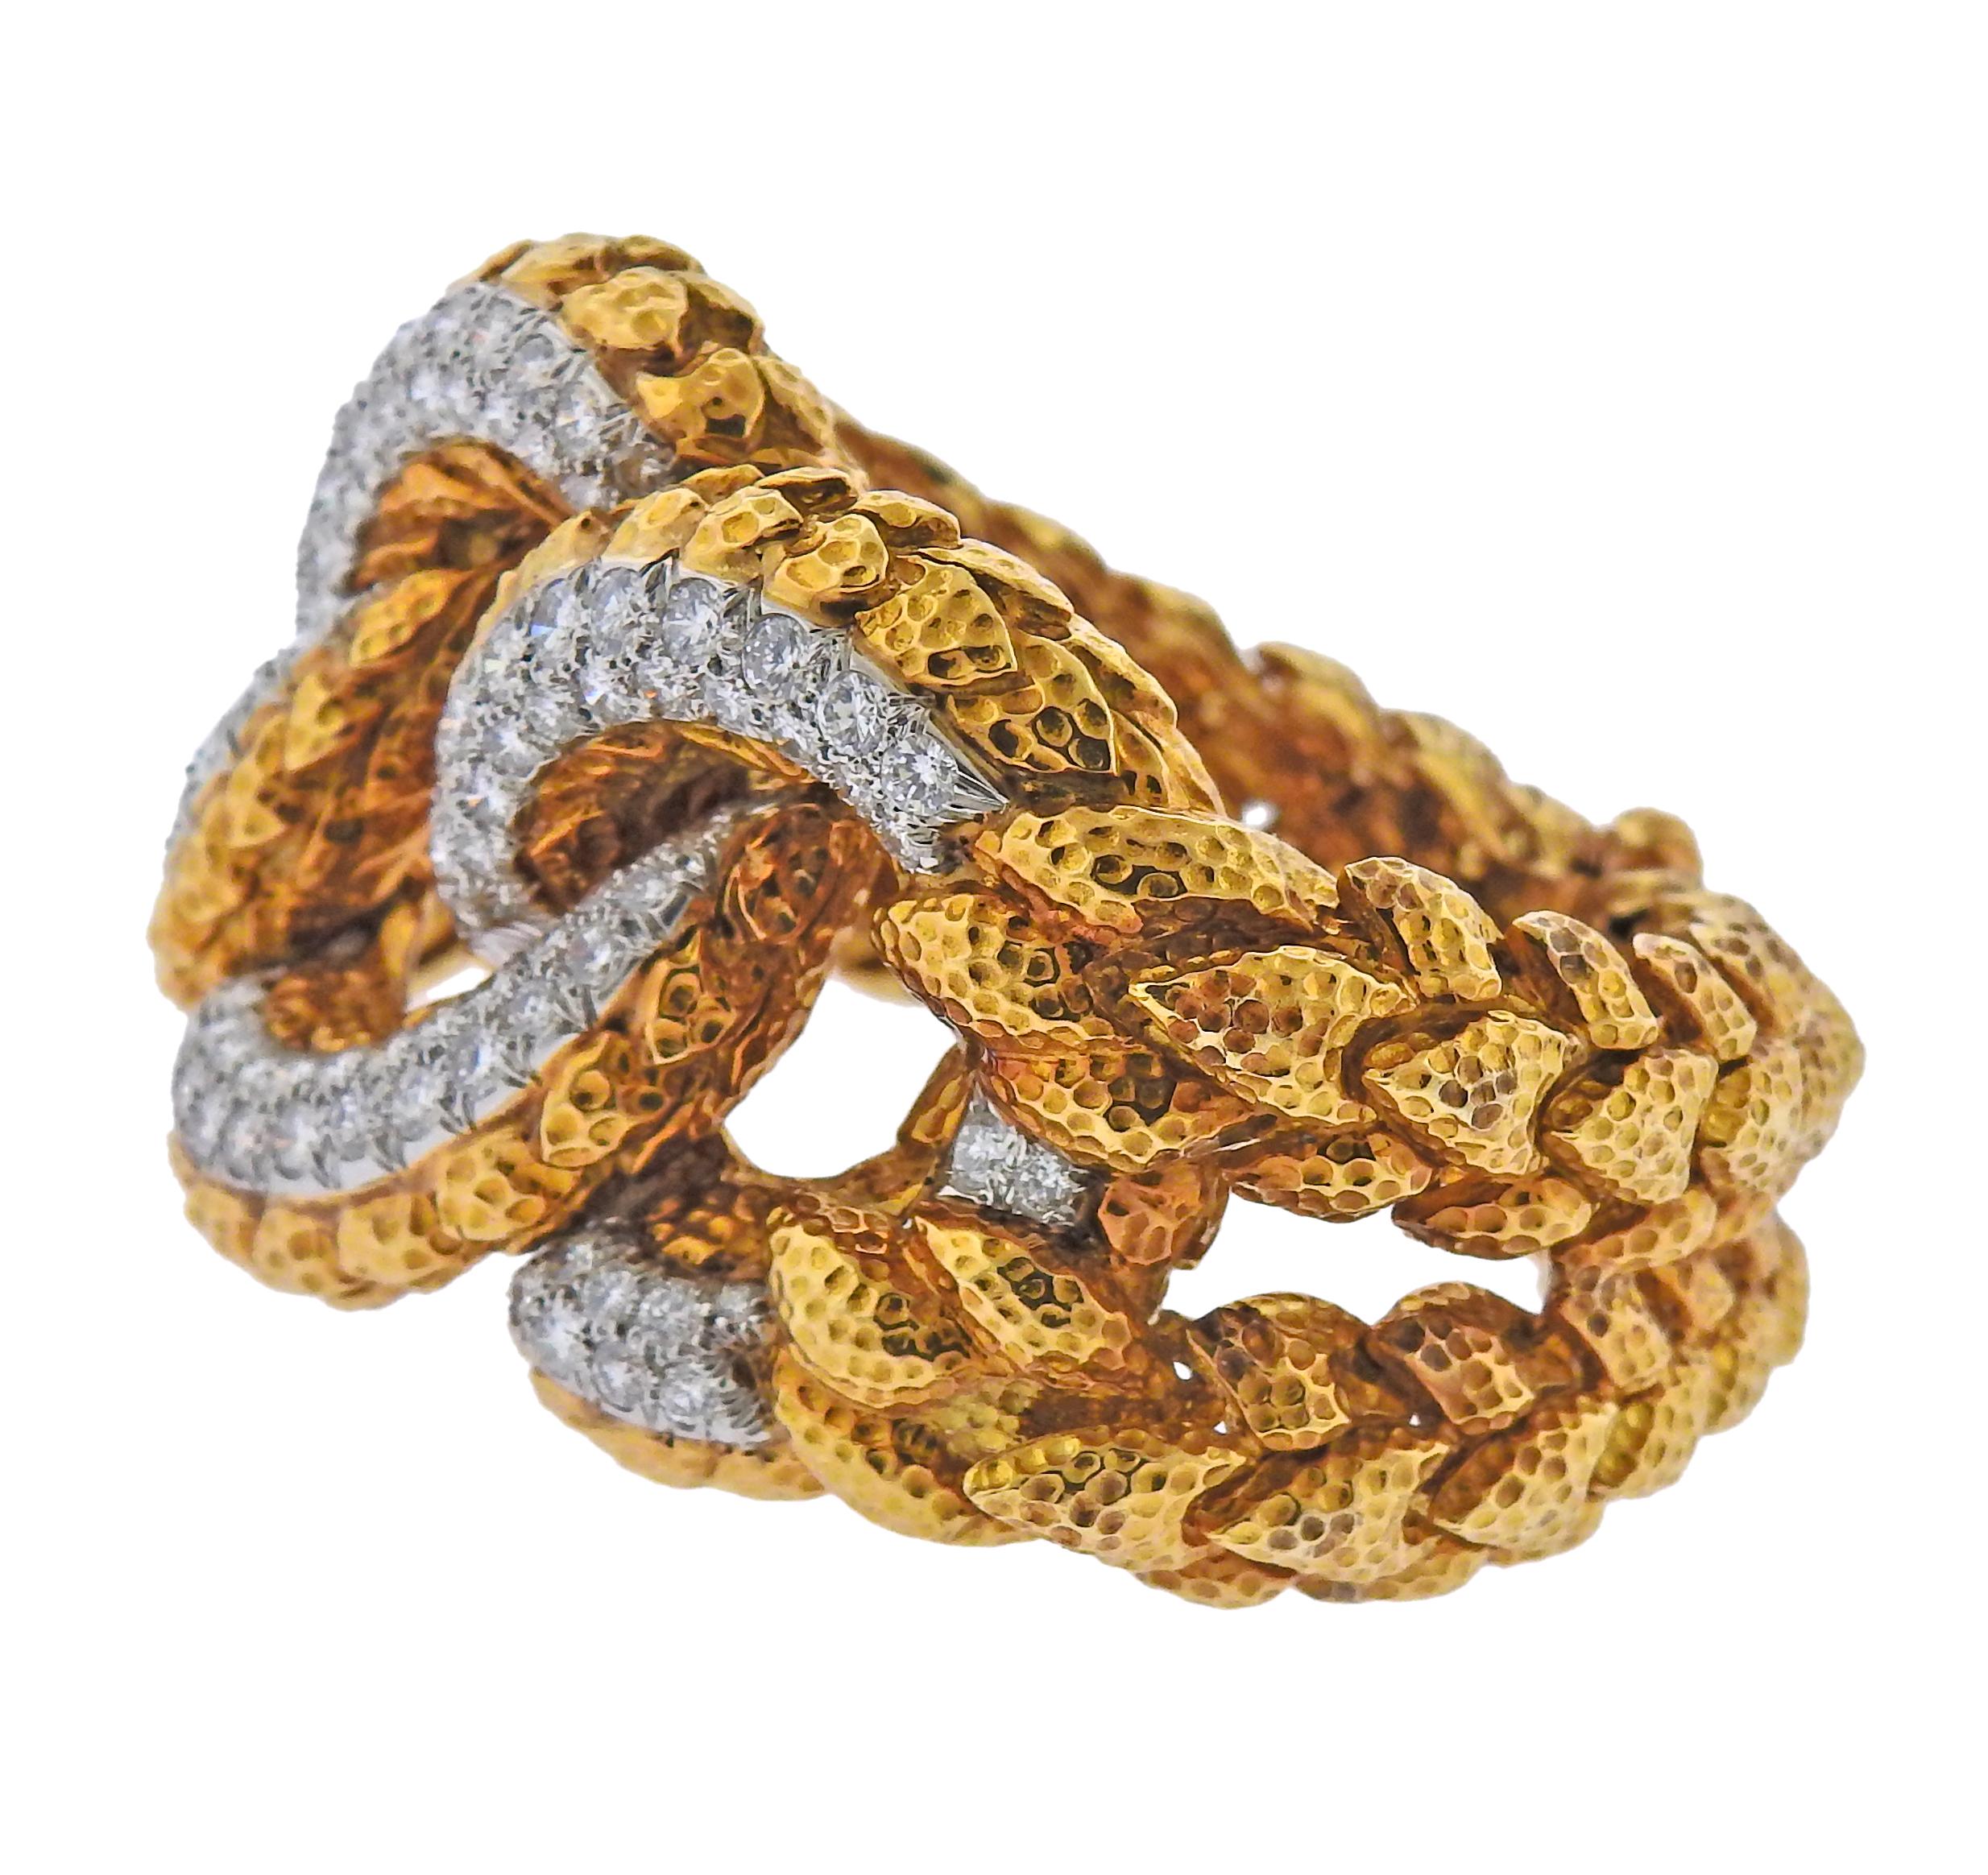 Iconic 18k hammered gold and platinum vintage link bracelet by David Webb, with approx. 5.50ctw in SI1/H diamonds. Original patina is present.  Bracelet fits up to 6 1/2